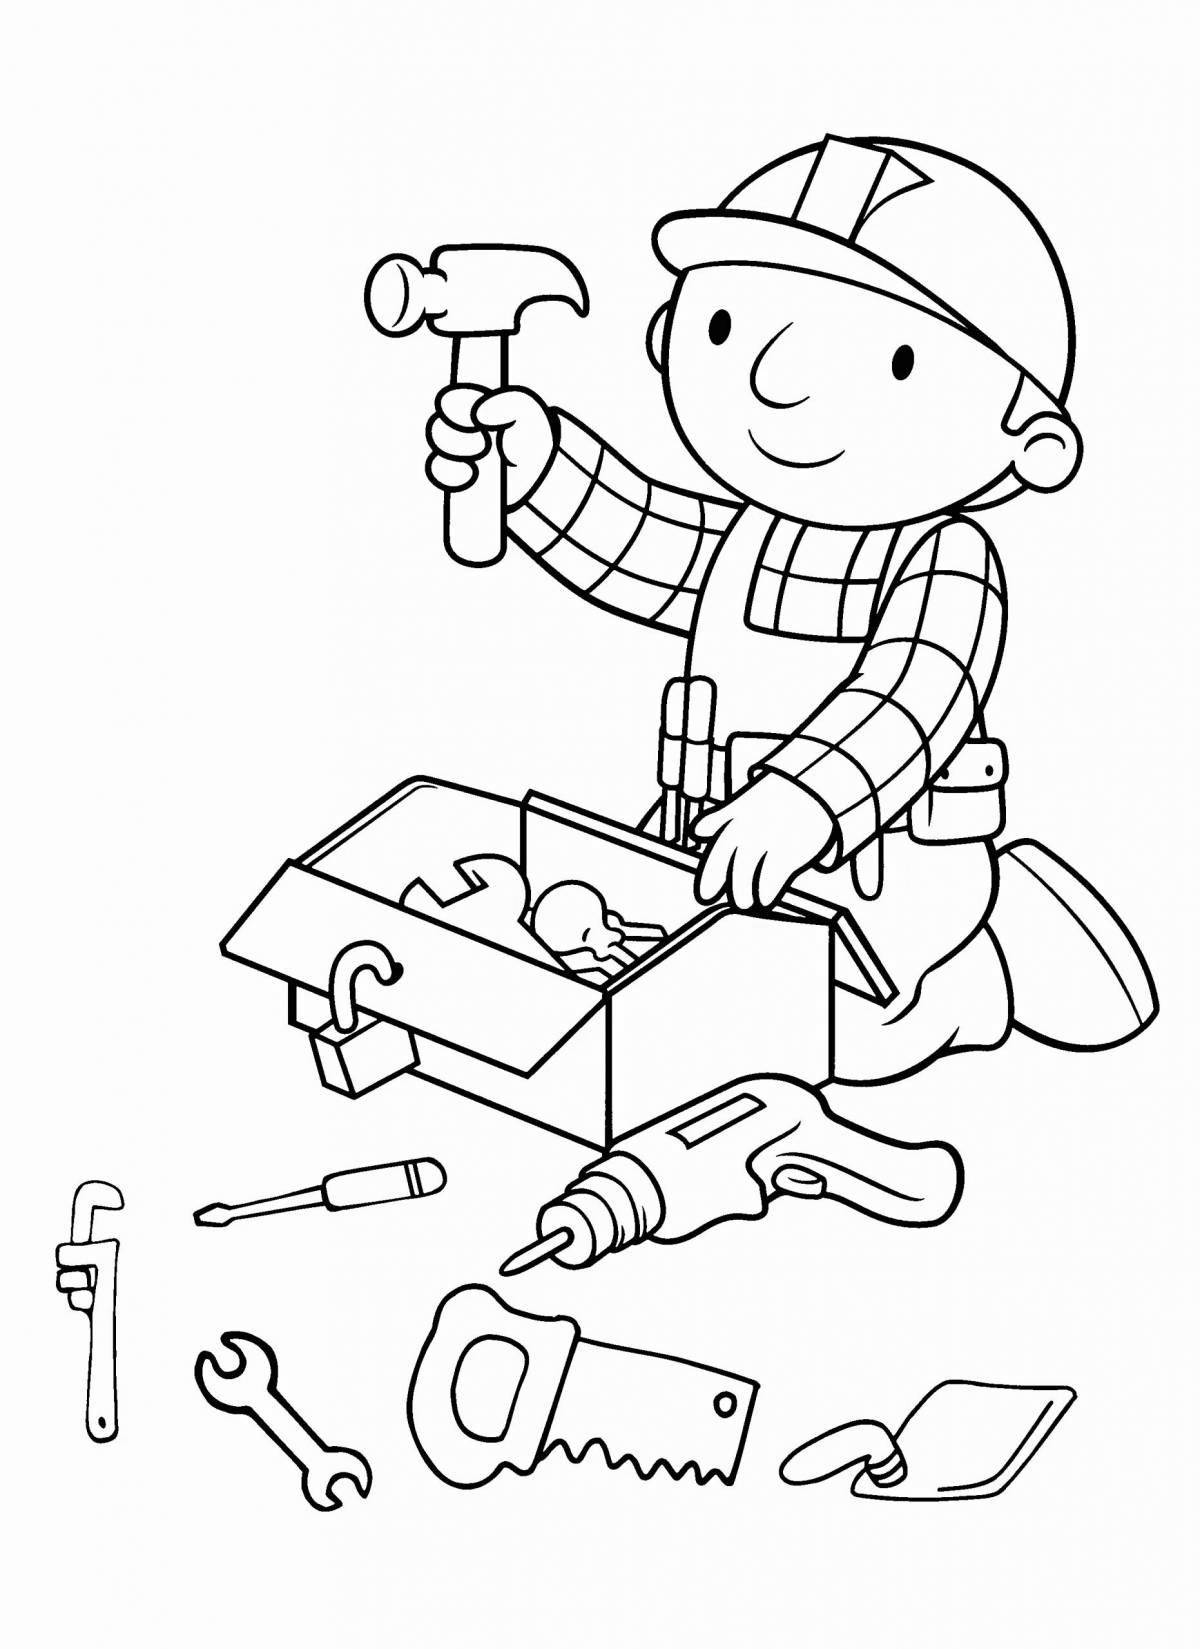 Fascinating coloring pages of professions middle group